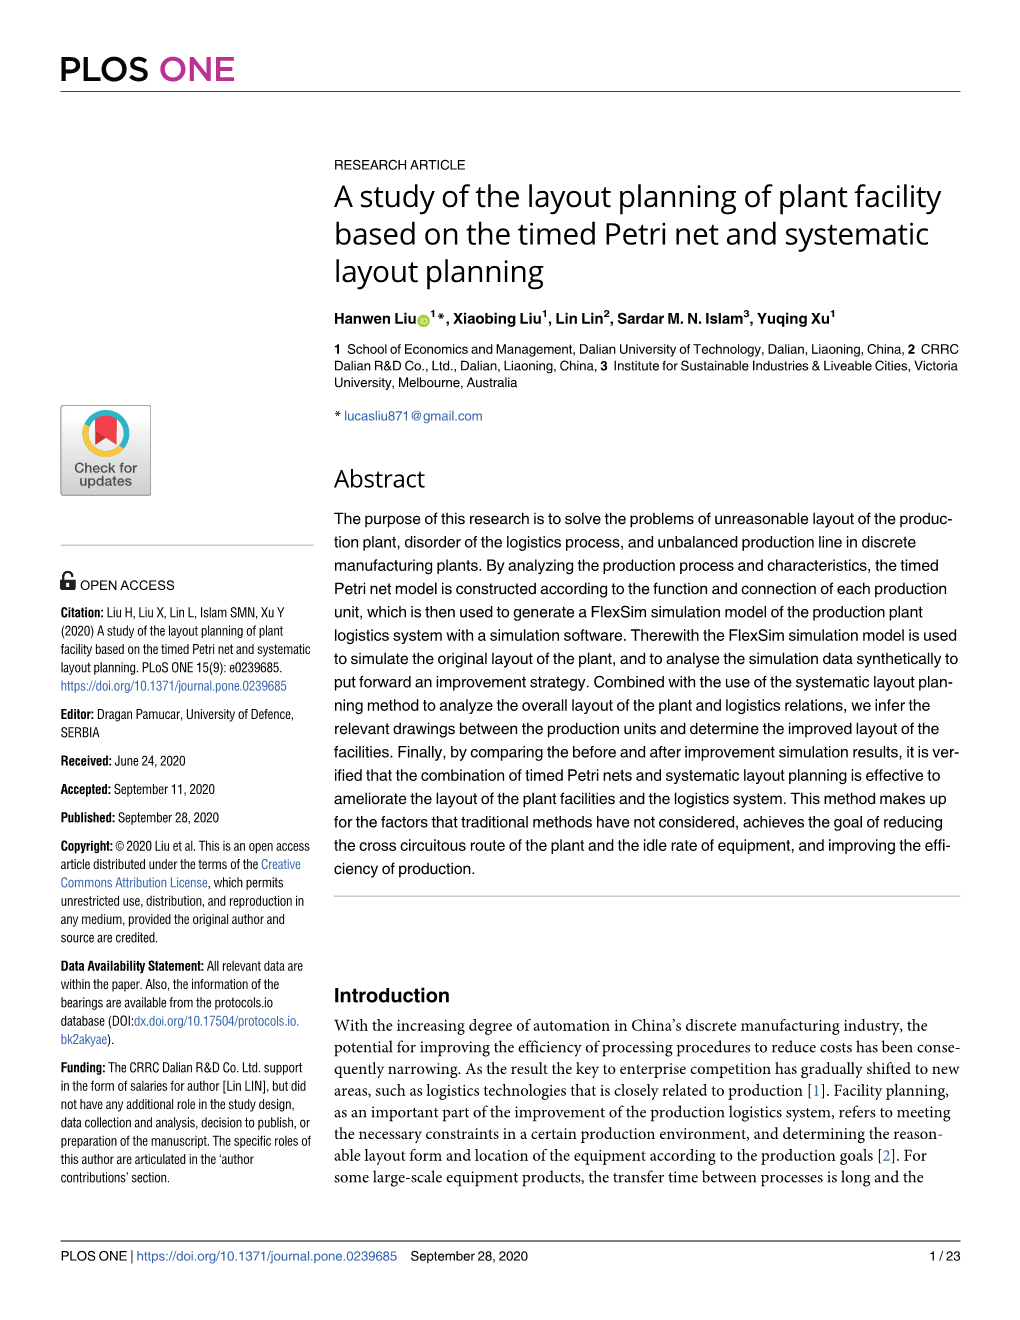 A Study of the Layout Planning of Plant Facility Based on the Timed Petri Net and Systematic Layout Planning